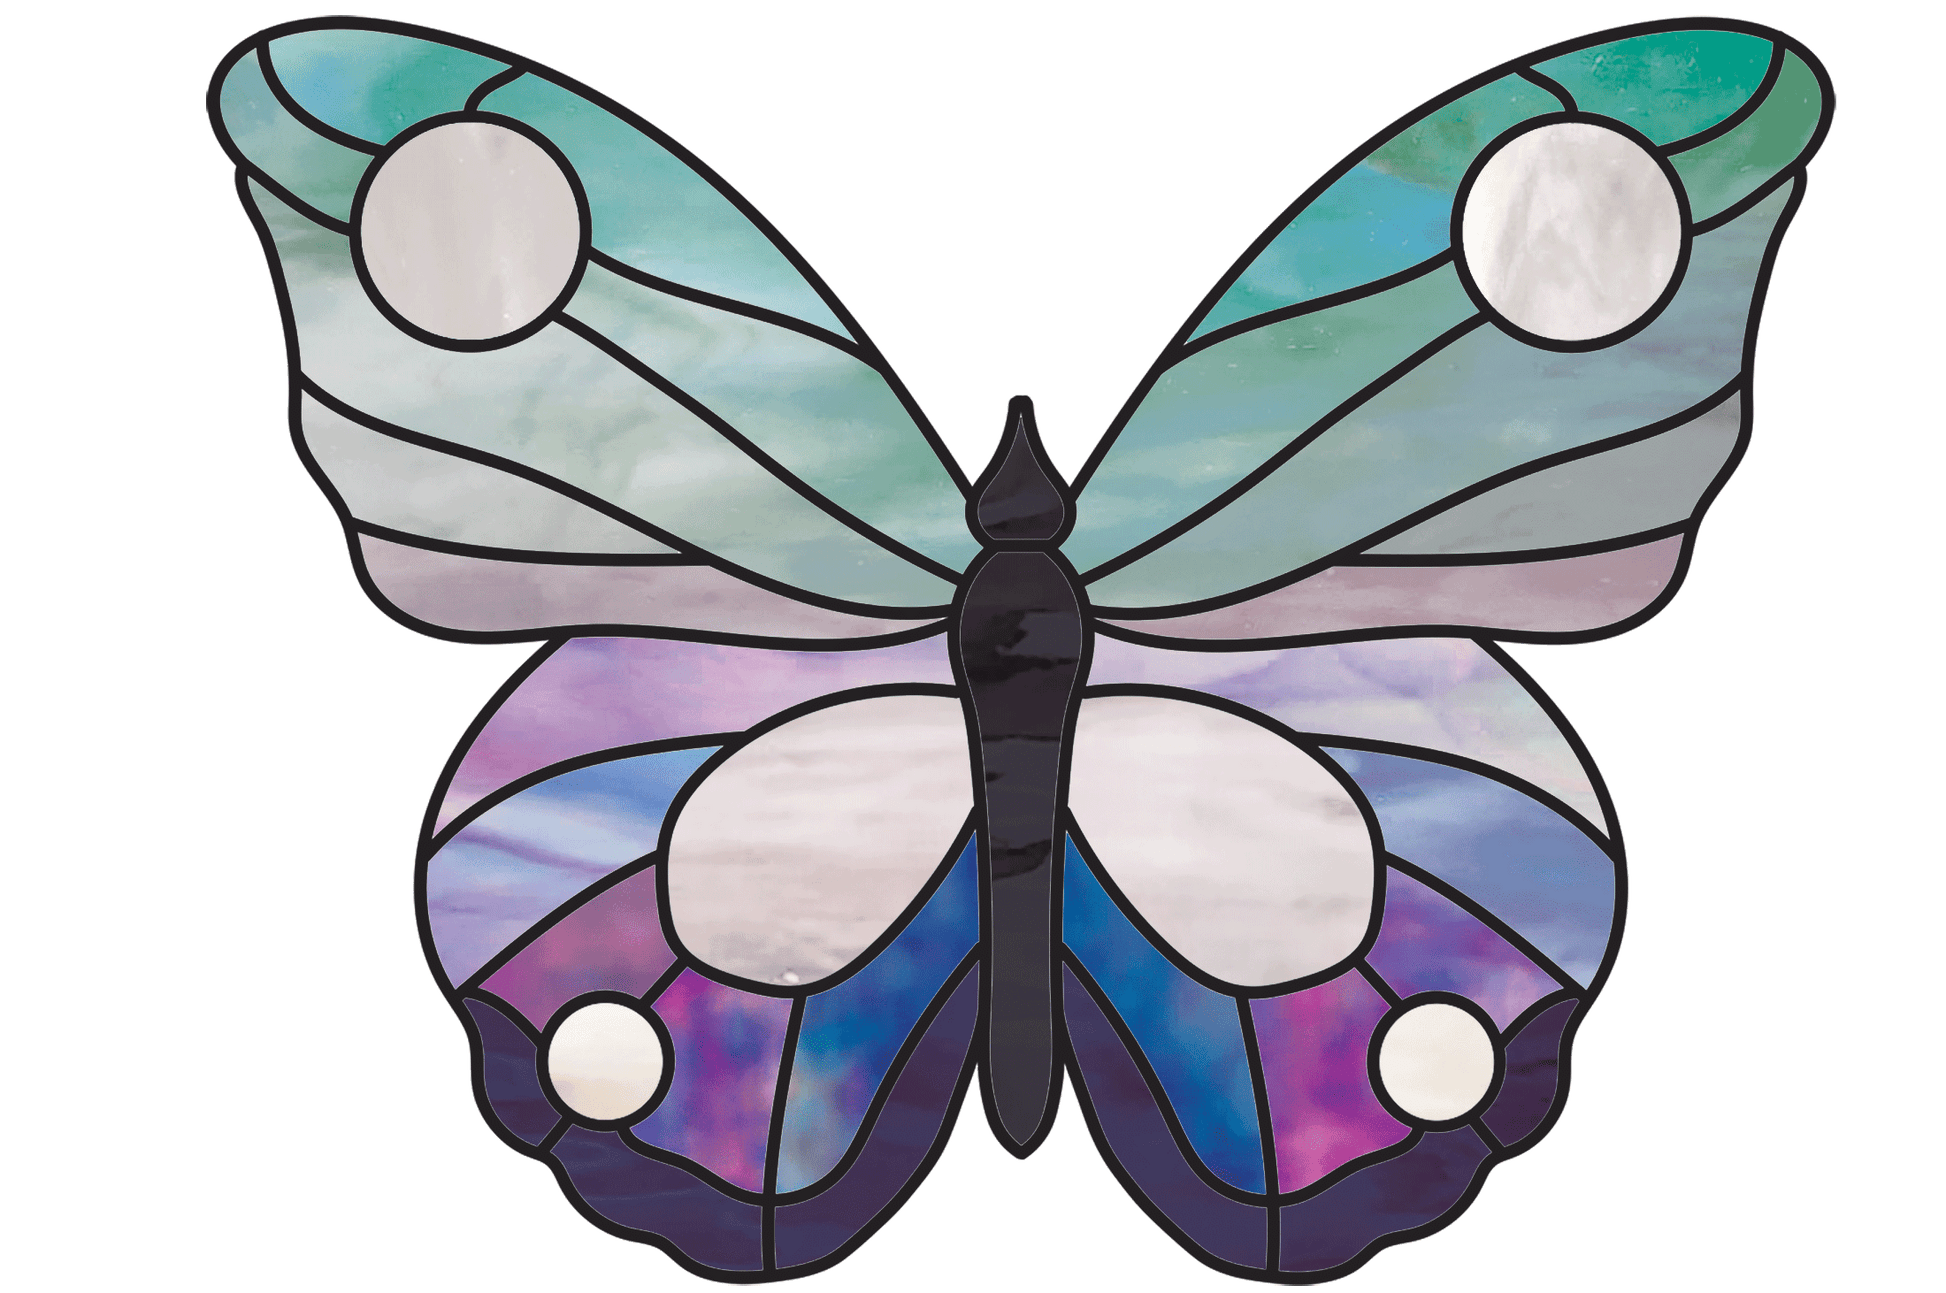 Butterfly stained glass pattern, instant PDF download, commercial and hobby licenses included